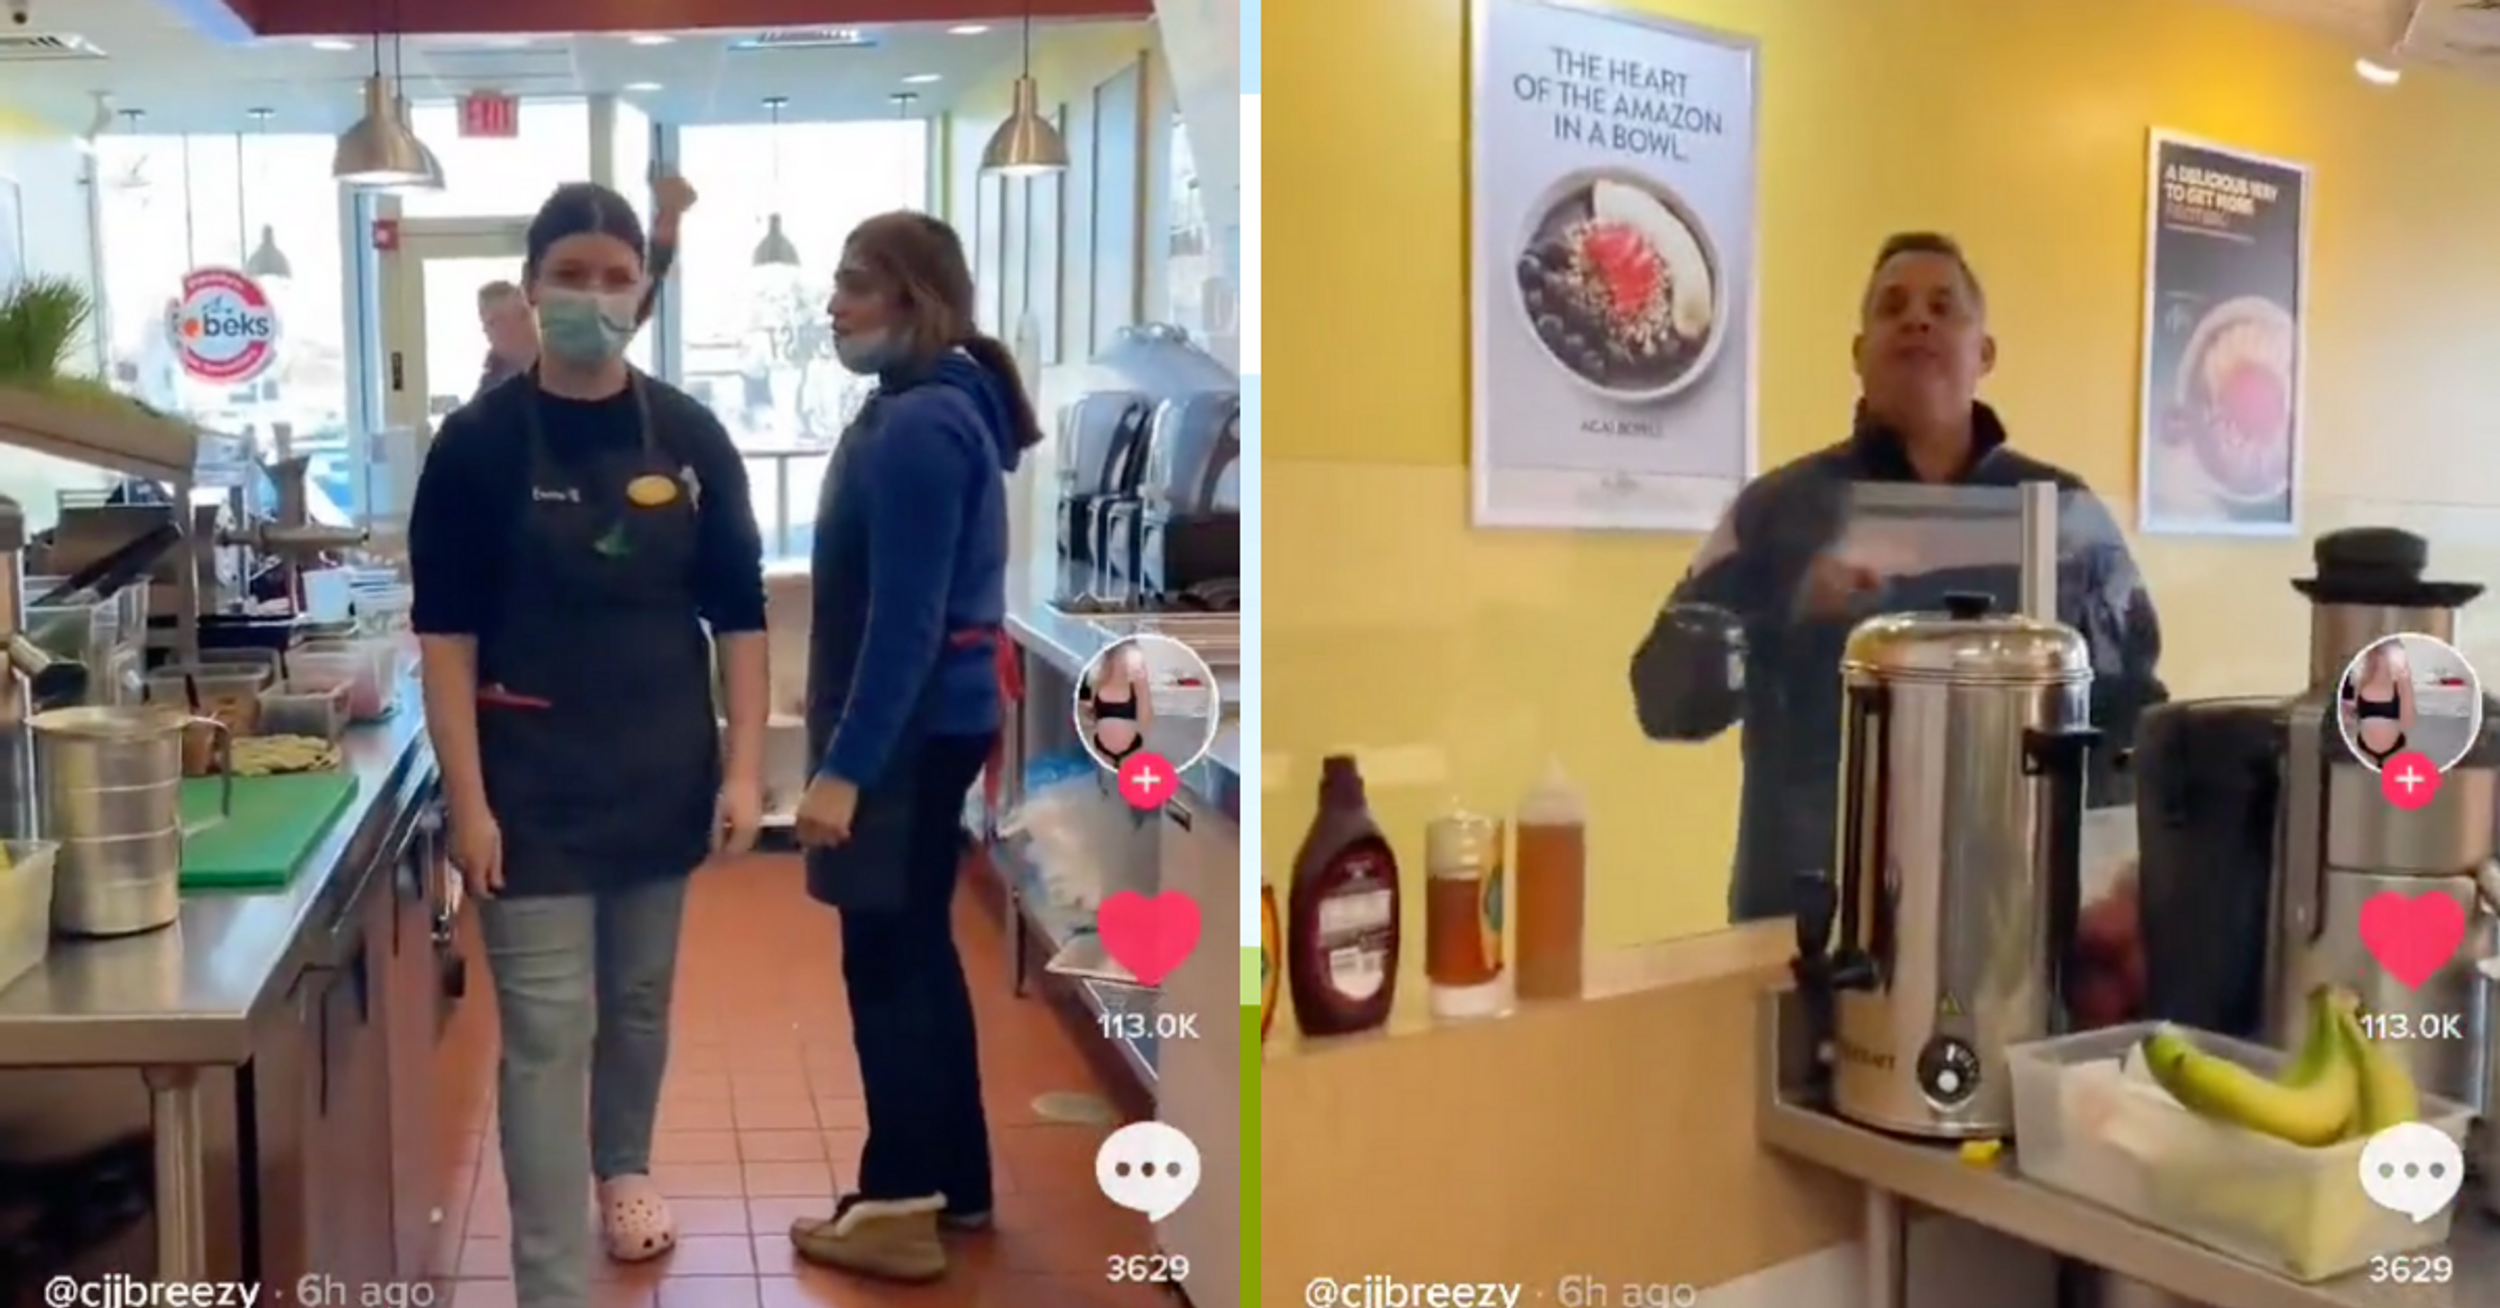 Connecticut Financial Adviser Arrested And Fired After Racist Meltdown Over Smoothie Goes Viral